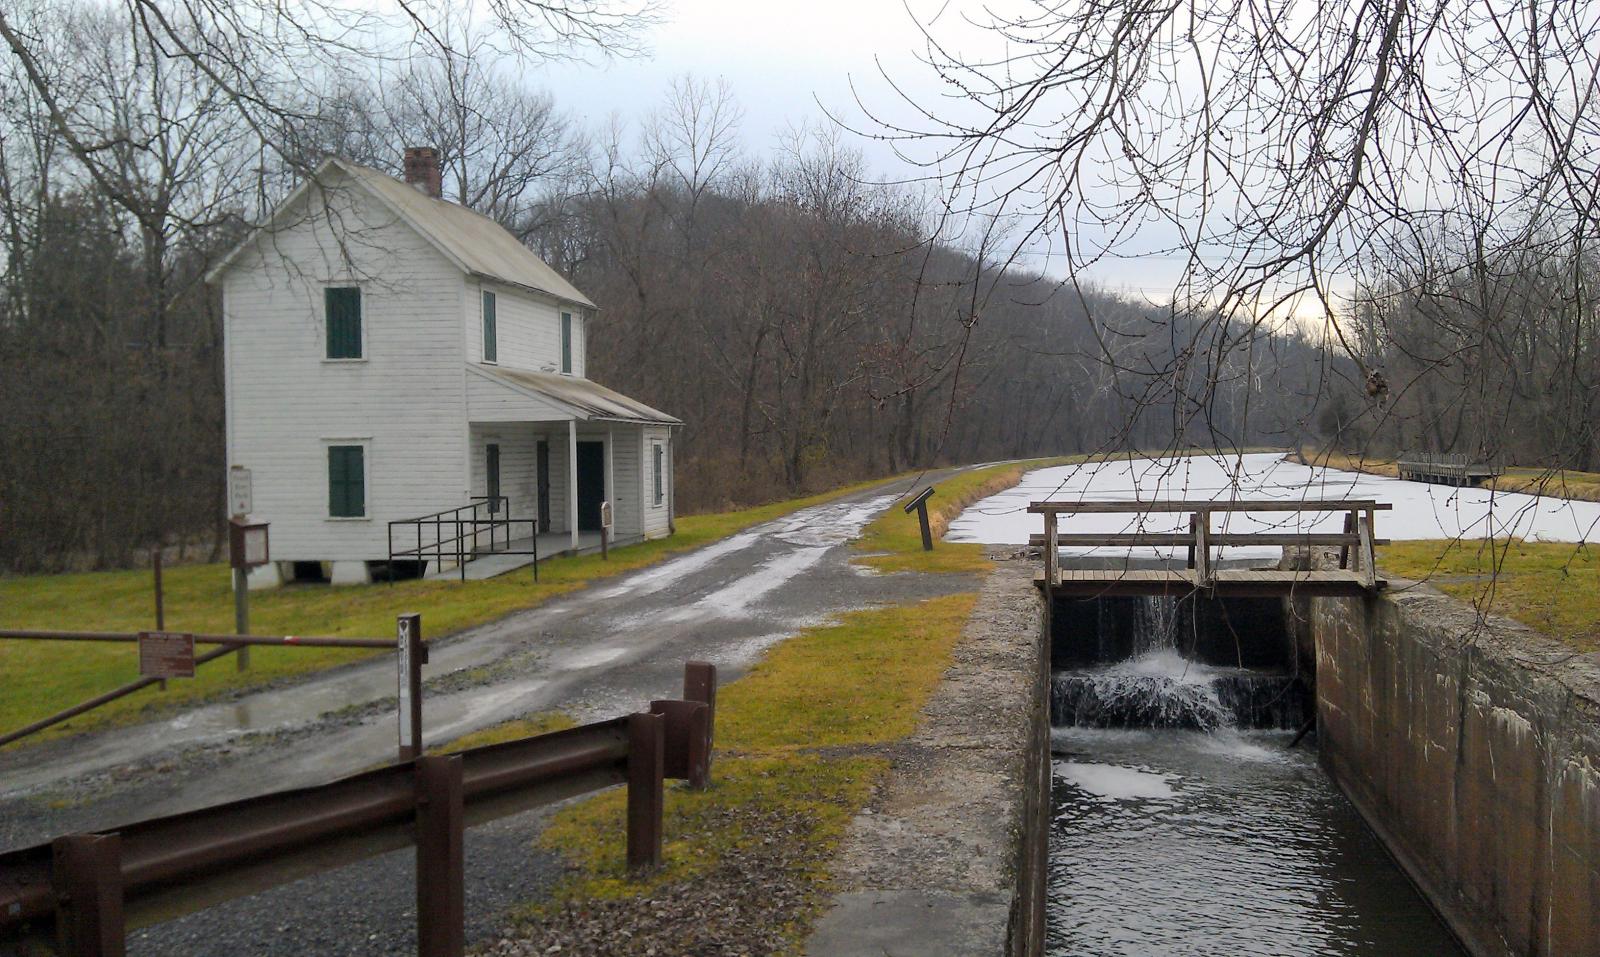 Shedding Light on C &O Canal’s African-American Roots